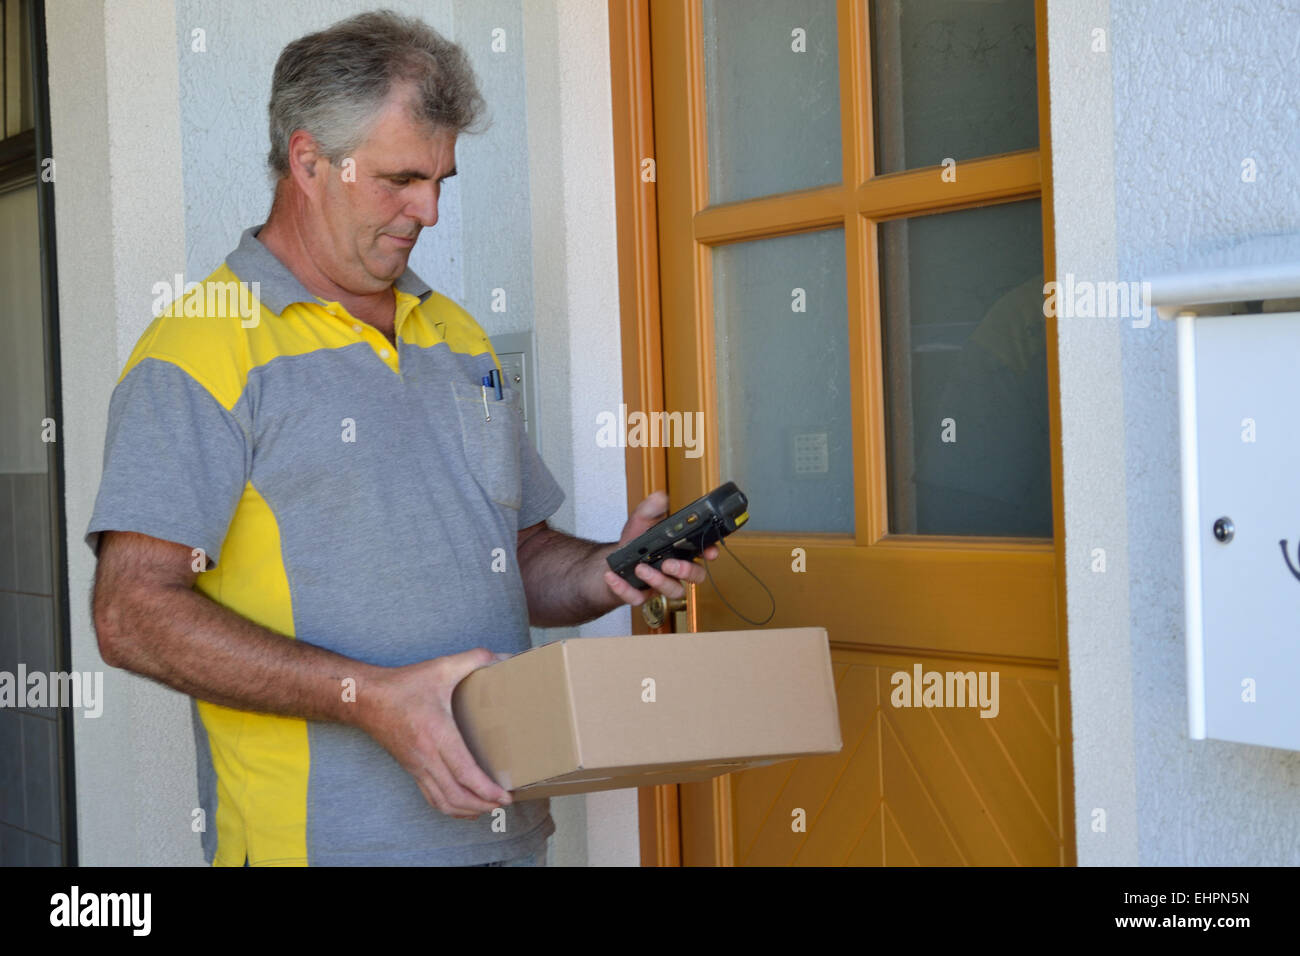 Postman delivers package Stock Photo